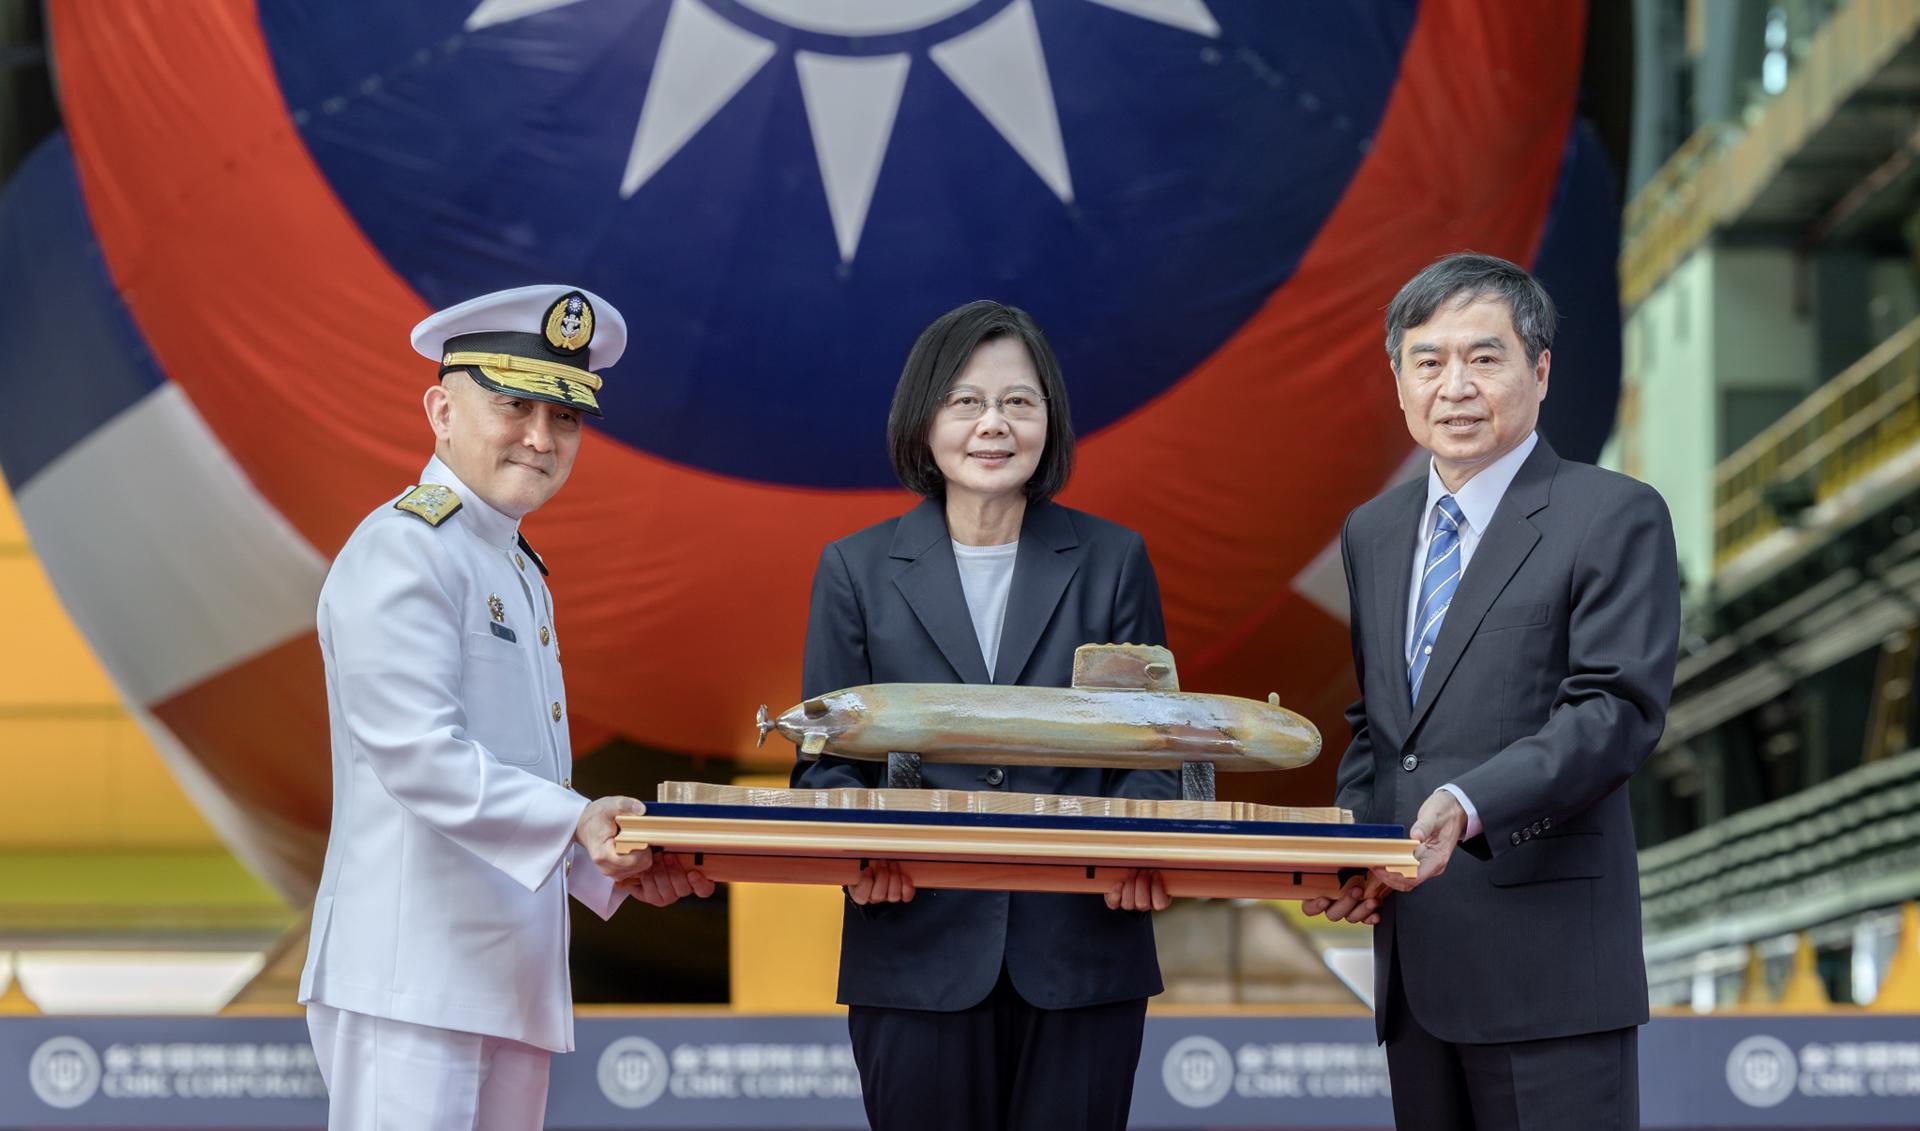 A handout photo made available by Taiwan's Presidential office shows Taiwan's President Tsai Ing-wen (C) posing with the model of a submarine prototype during the launching ceremony of Taiwan's first domestically-made submarine named 'Haikun' at a shipyard in Kaohsiung, Taiwan, 28 September 2023. EFE-EPA/TAIWAN PRESIDENTIAL OFFICE / HANDOUT HANDOUT EDITORIAL USE ONLY/NO SALES